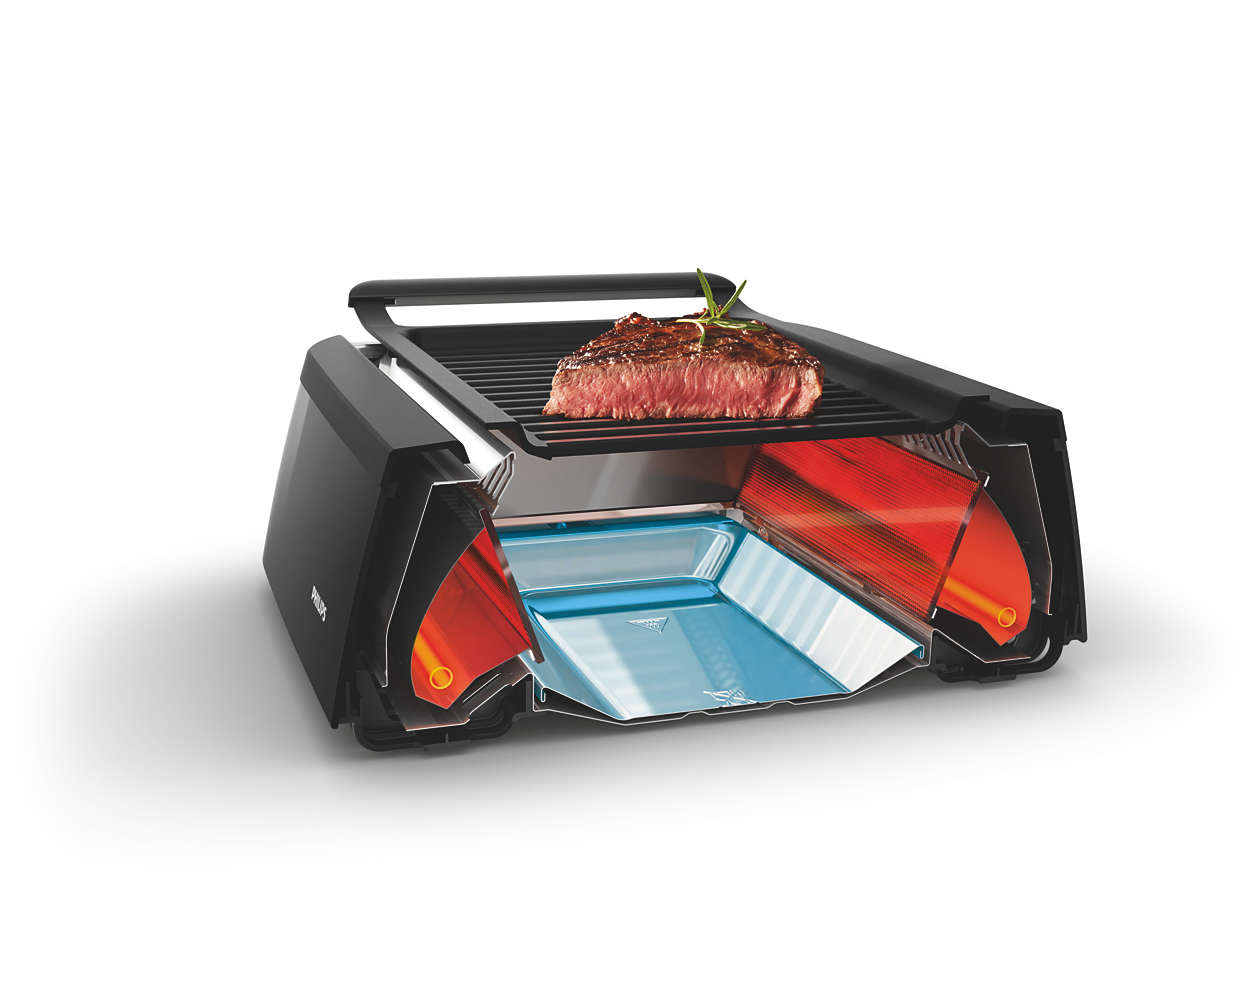 sail piece wise Avance Collection Indoor Grill HD6371/94 | Philips